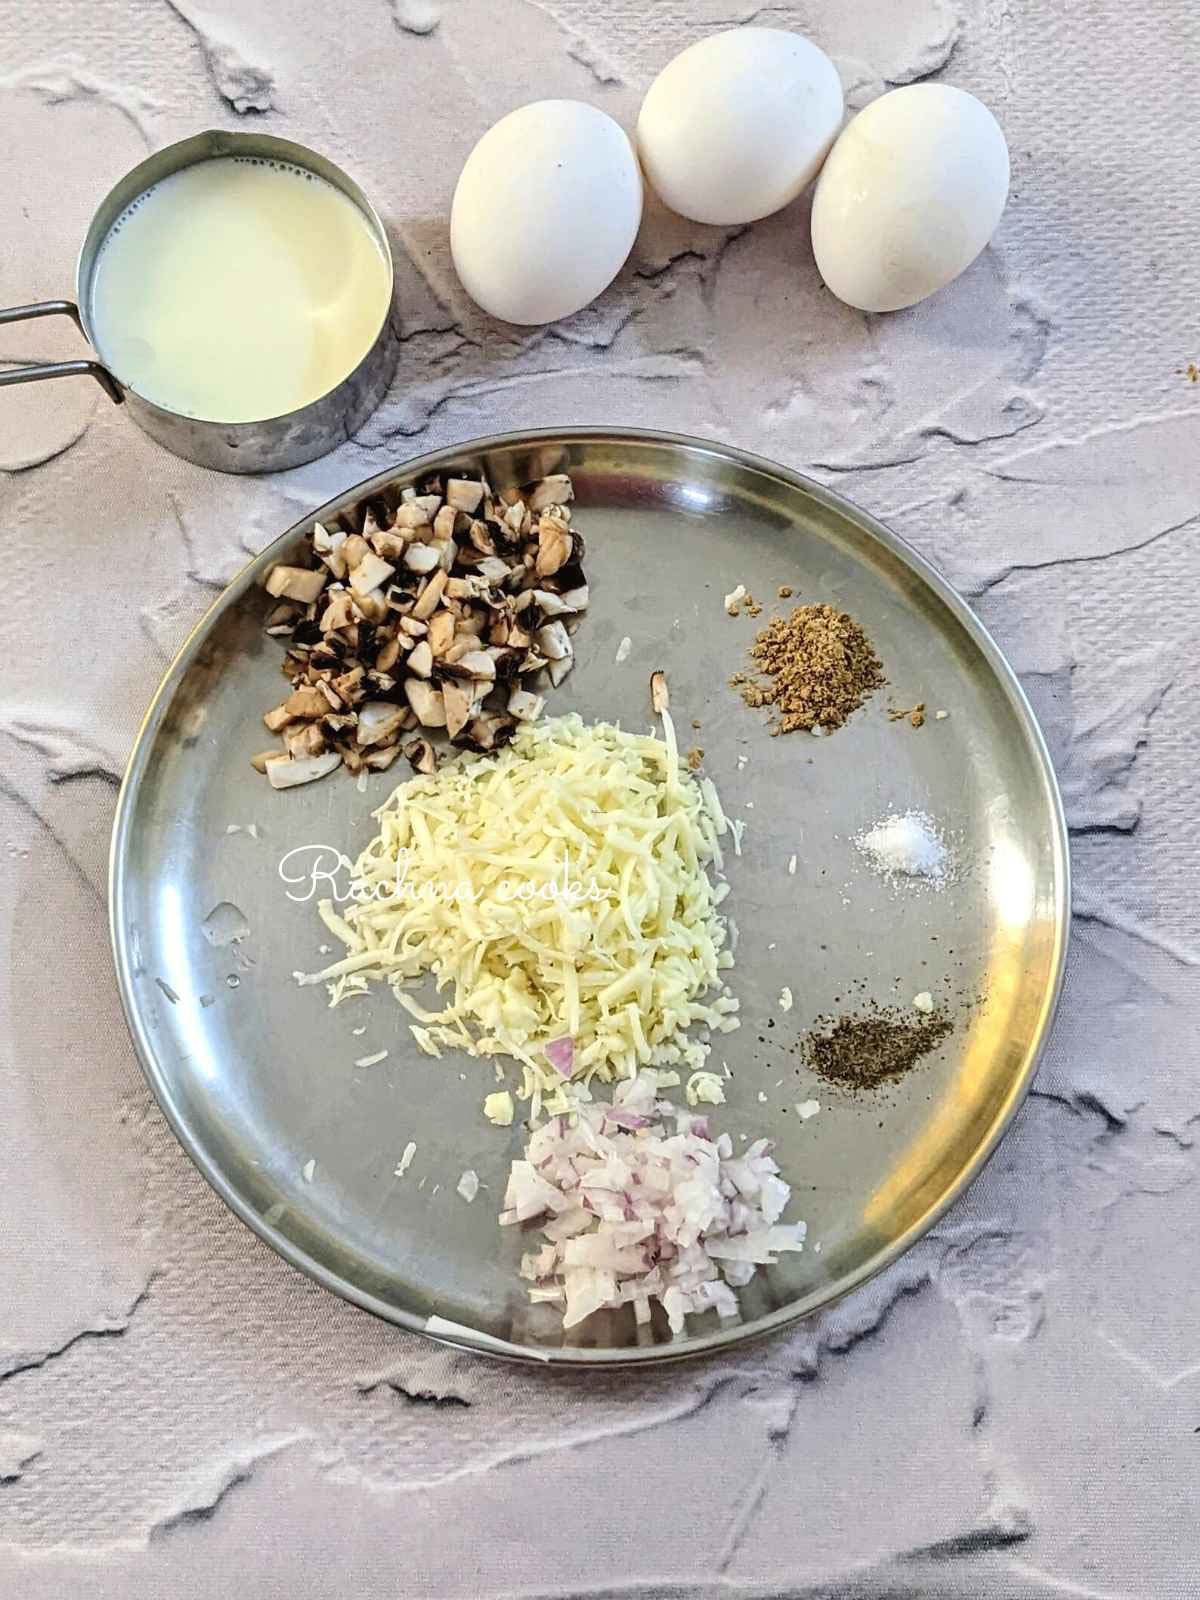 Milk, eggs, cheese, spices and chopped mushrooms in the frame